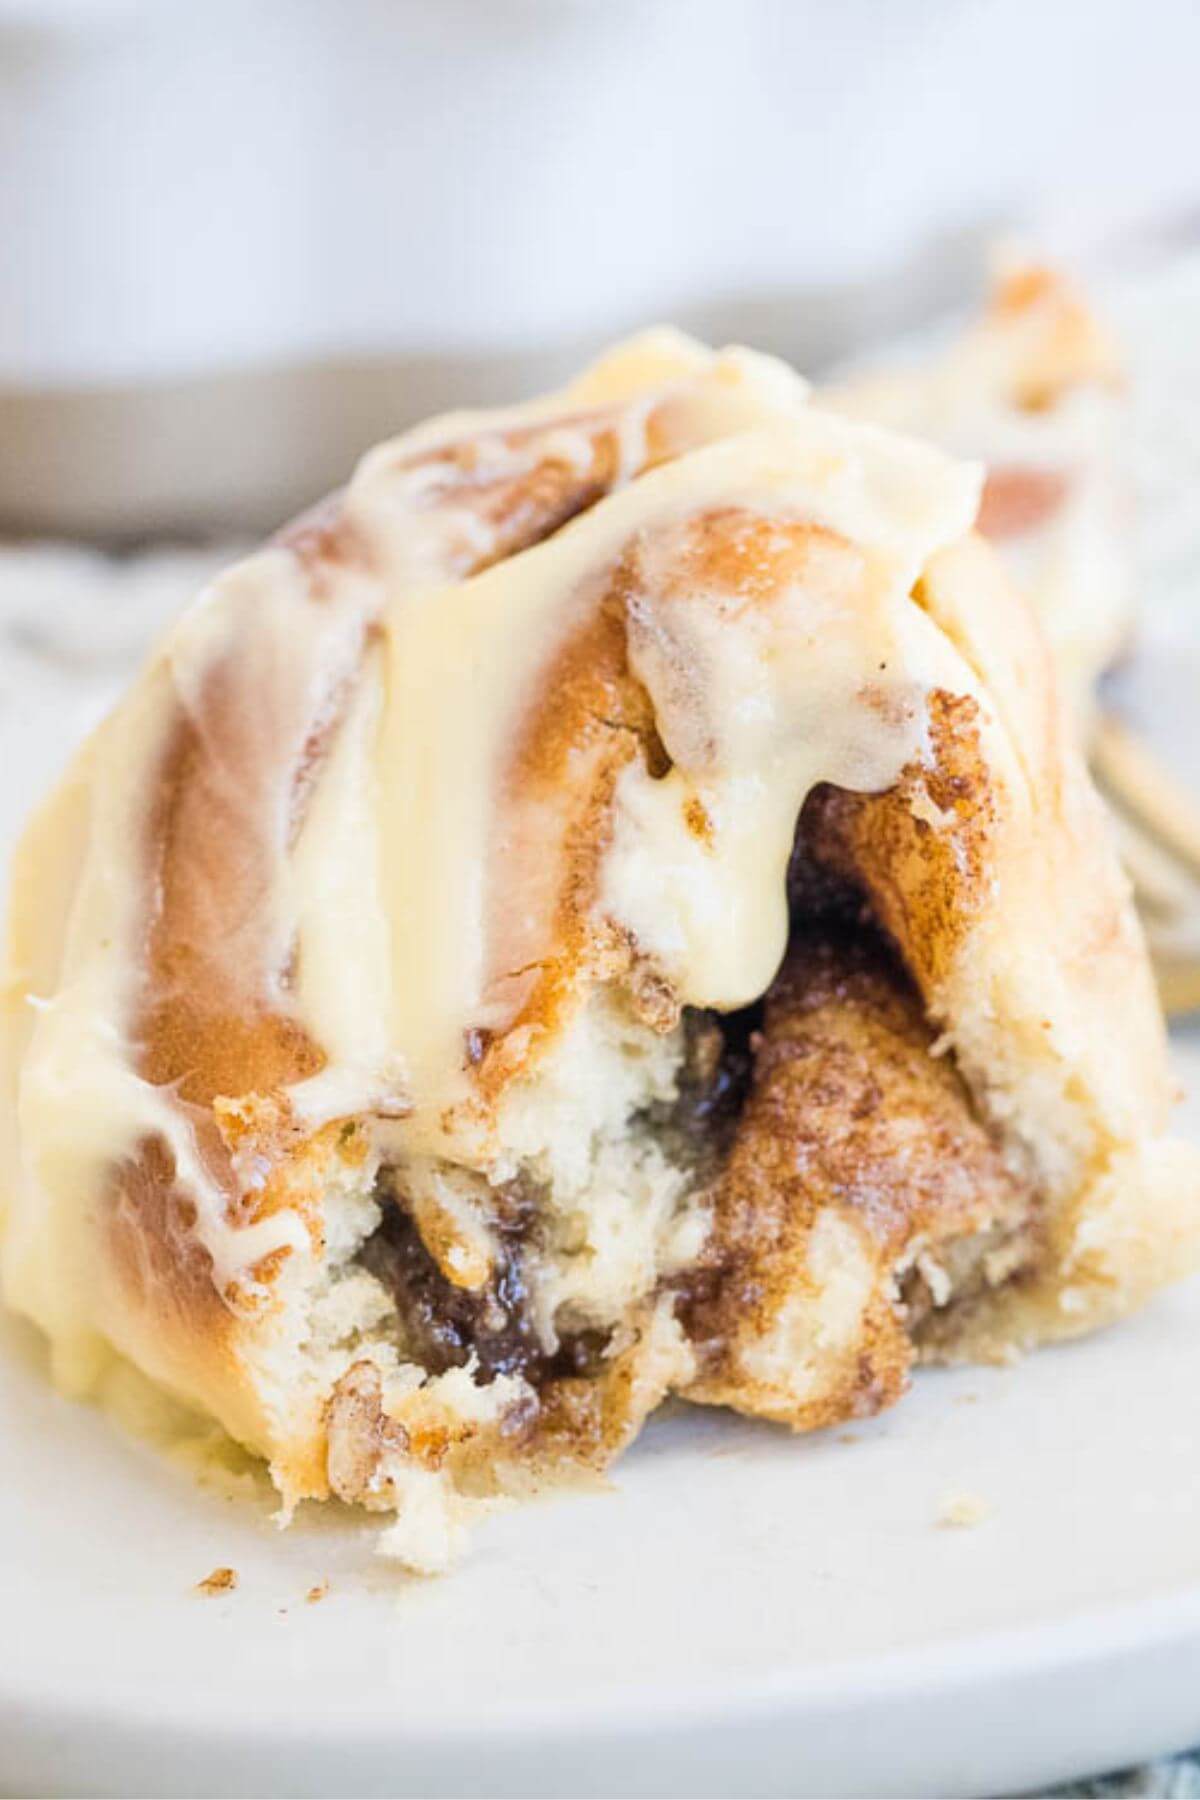 Half of a cinnamon bun shows the smooth cream cheese icing and gooey cinnamon filling inside.